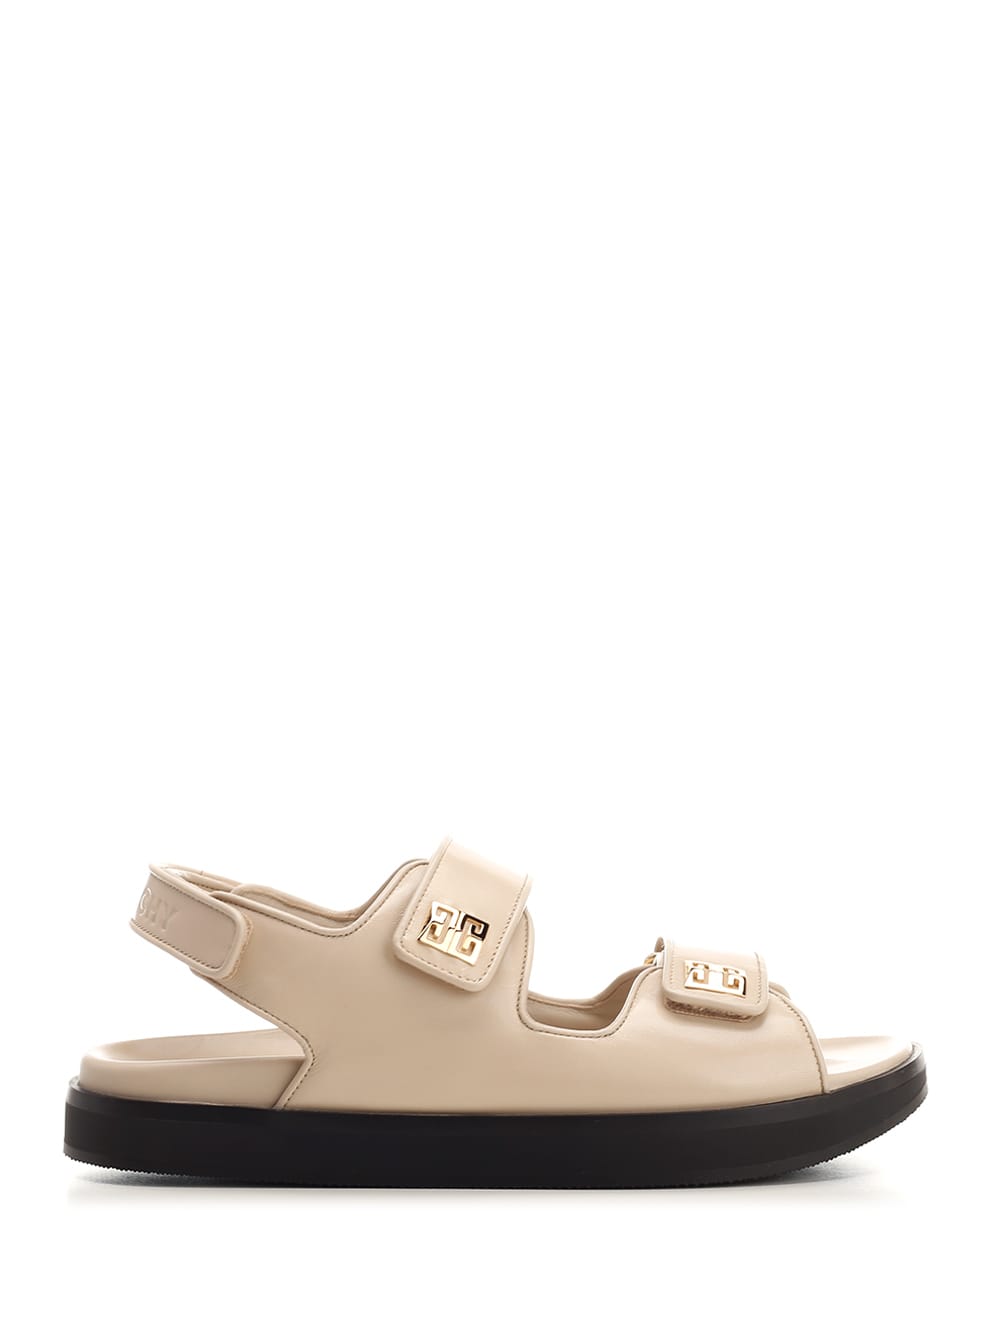 GIVENCHY IVORY LEATHER SANDALS